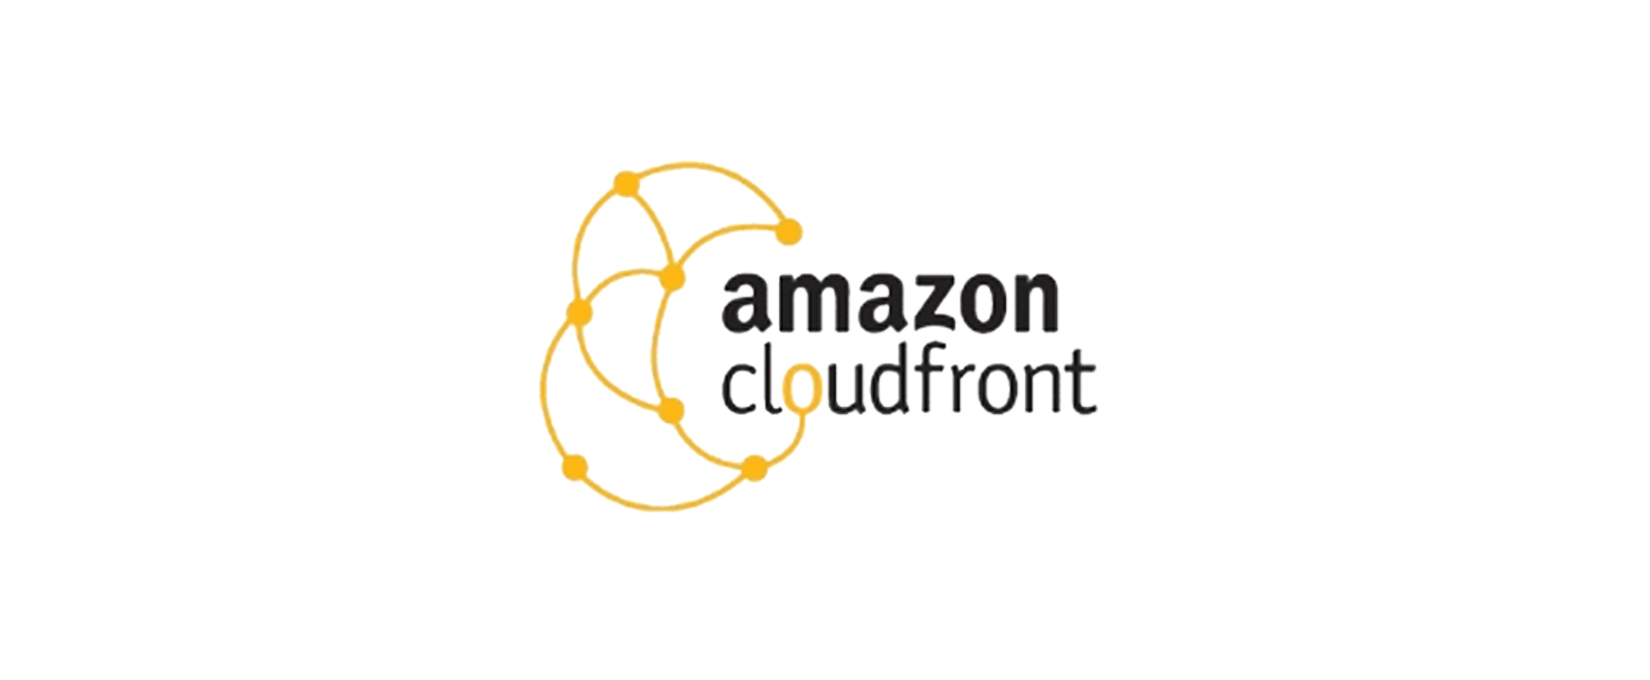 10 Frequently asked Questions about Amazon CloudFront - A Callout ...